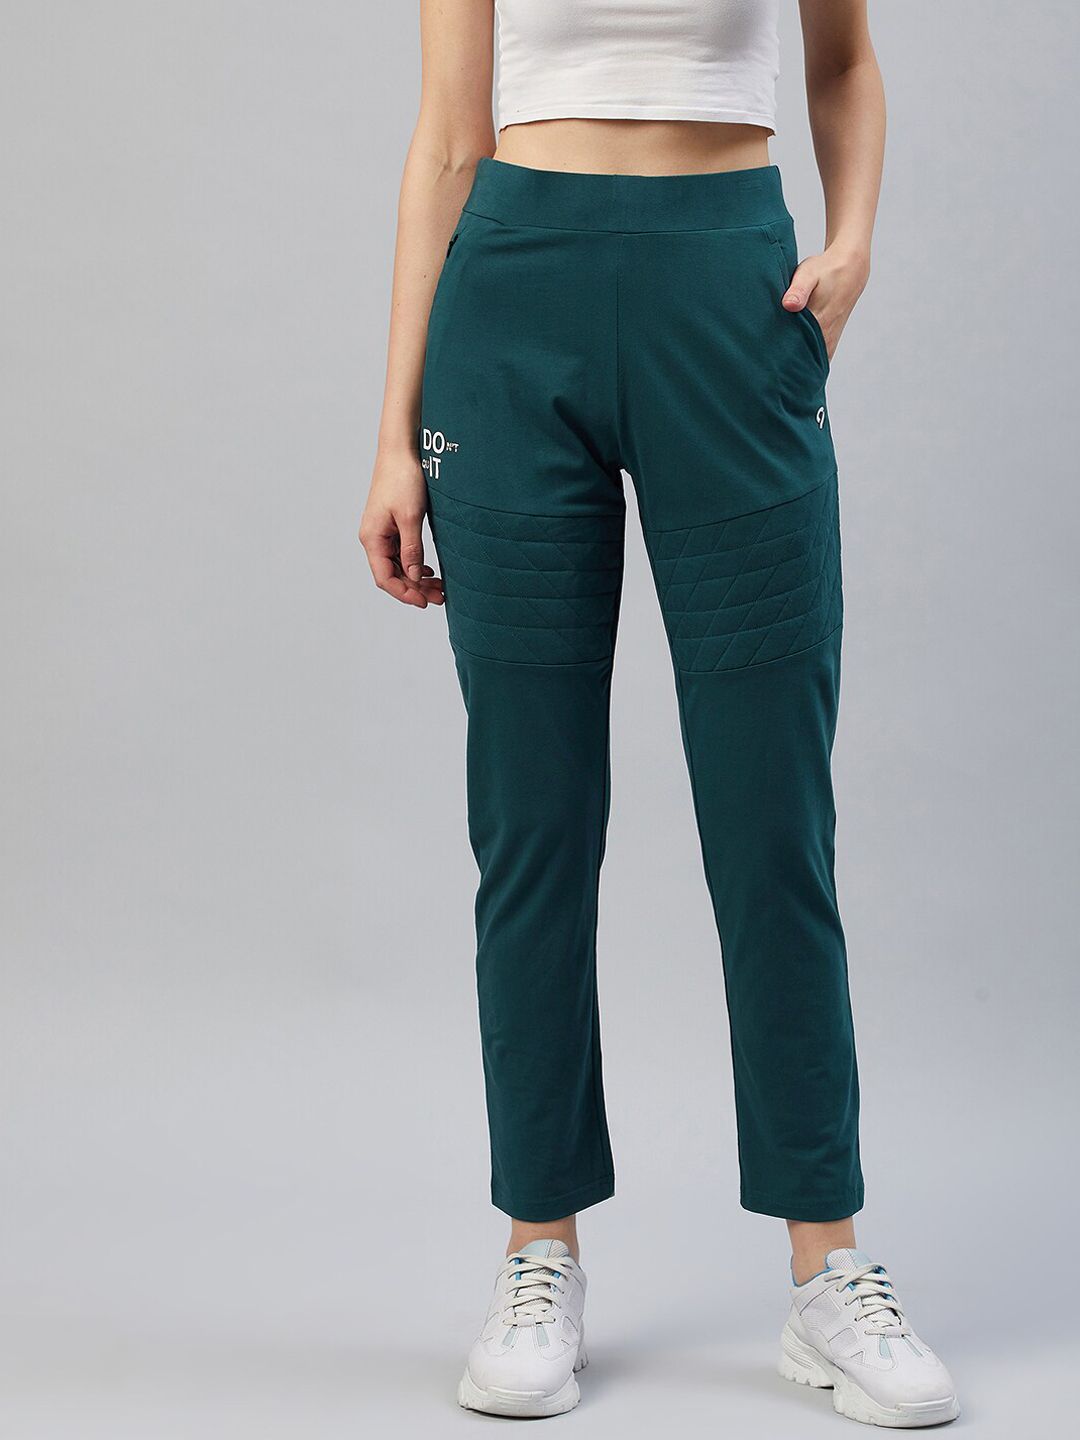 C9 AIRWEAR Women Teal-Green Solid Track Pants Price in India